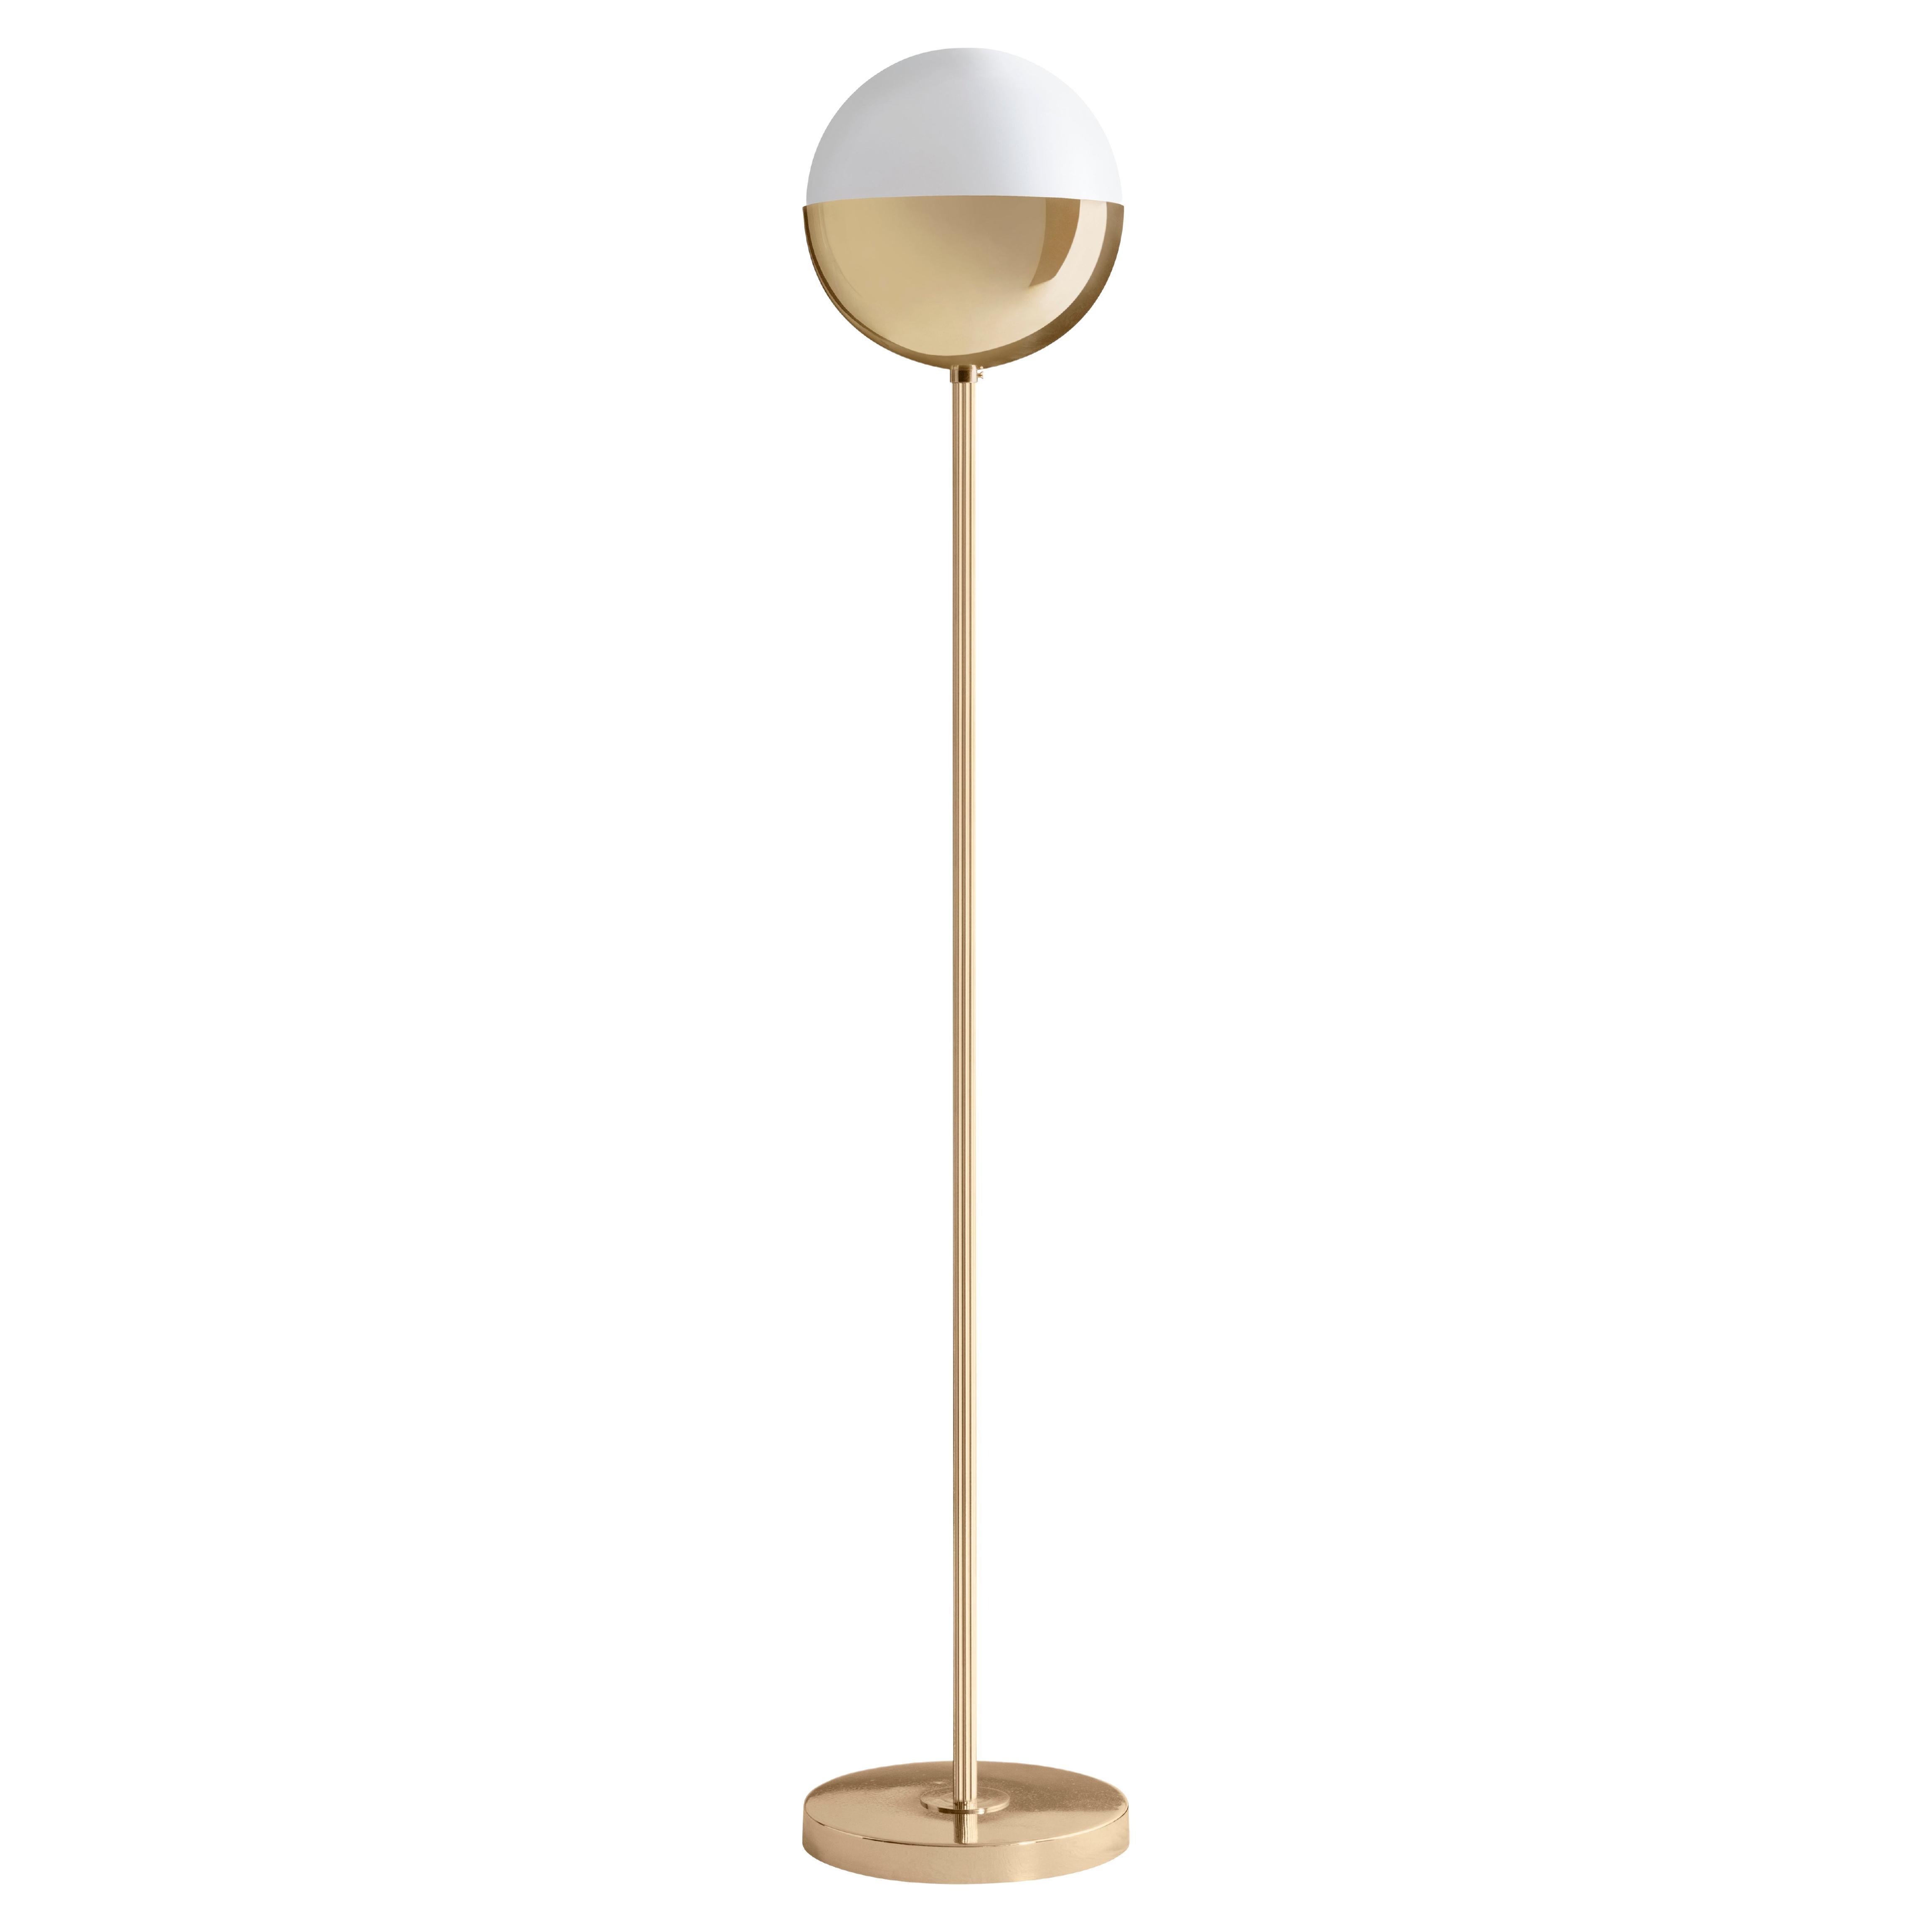 Set of 2 brass floor lamp 01 dimmable 160 by Magic Circus Editions
Dimensions: D 25 x H 160 cm
Materials: Brass base, smooth brass tube, glossy mouth blown glass
Non-dimmable version available.


Rethinking, reimagining, redesigning familiar